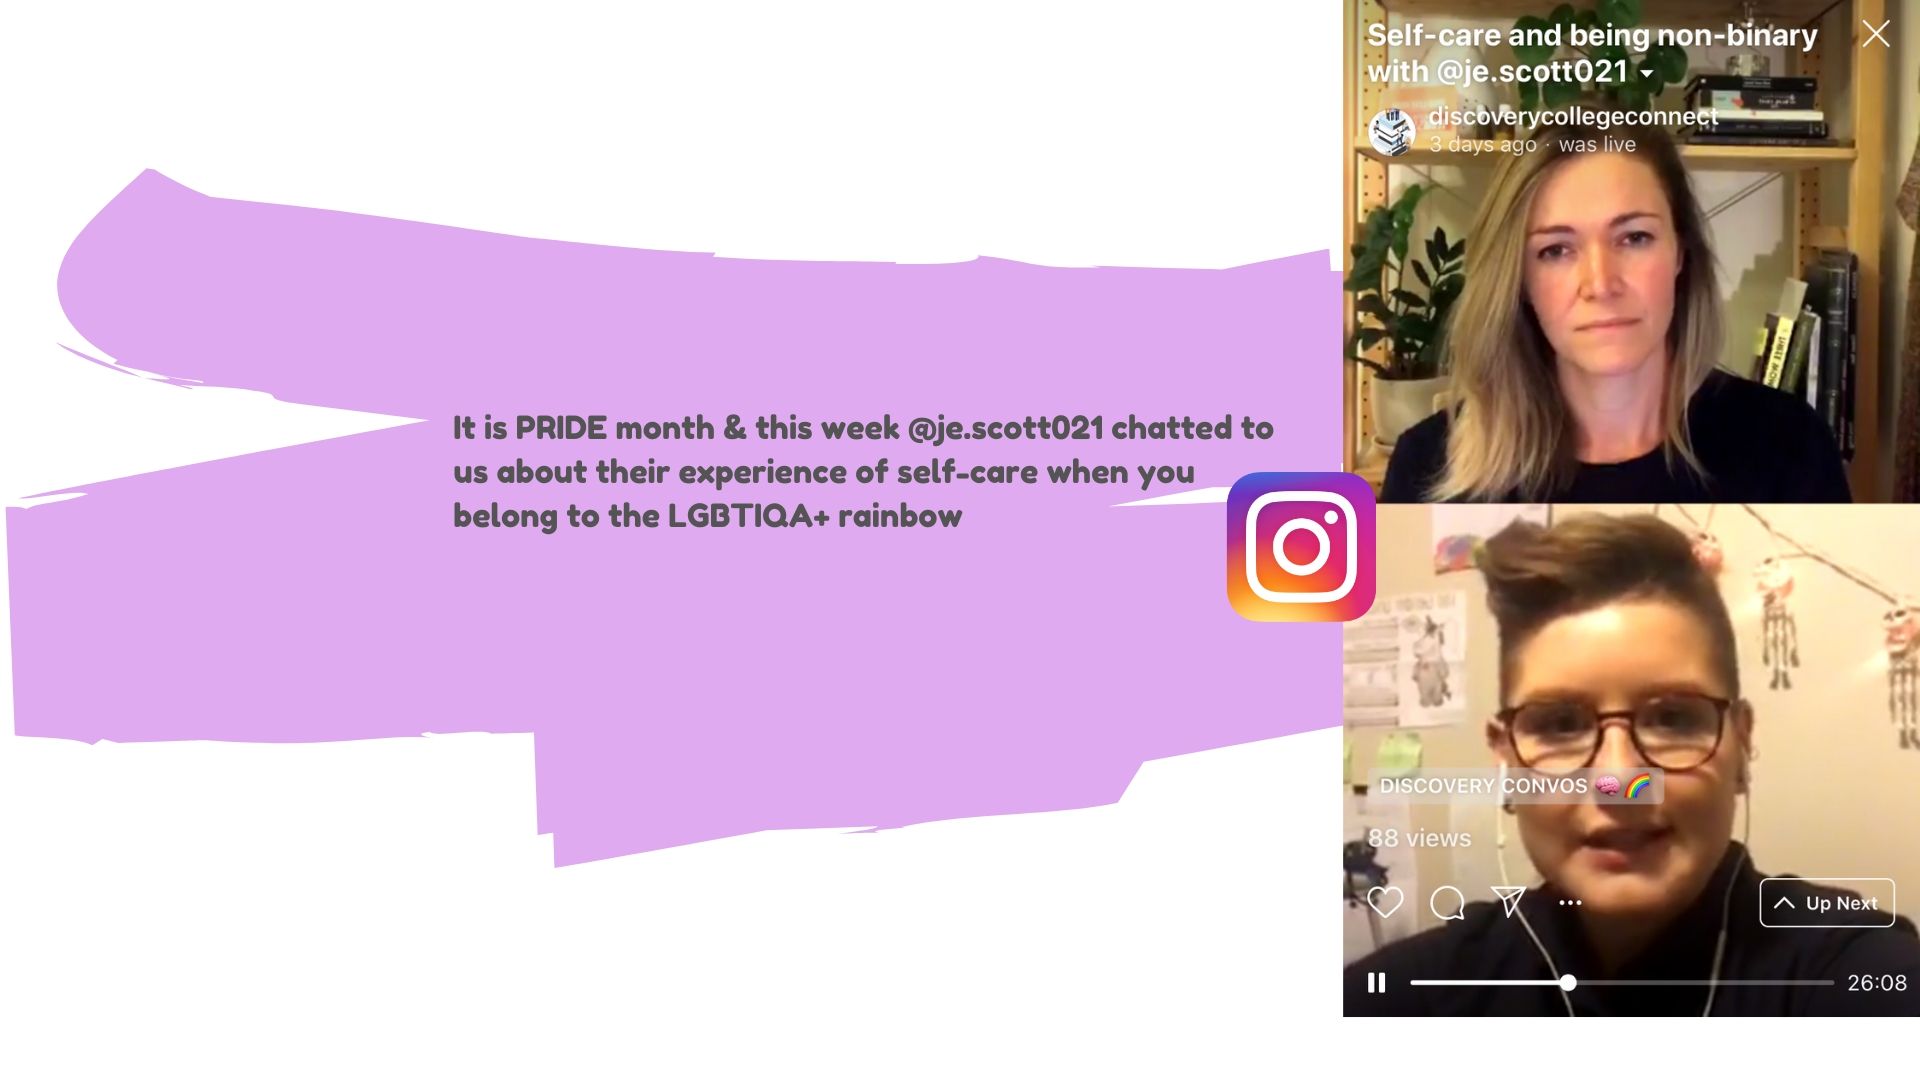 This discovery convo is about self-care in the LGBTIQA+ community